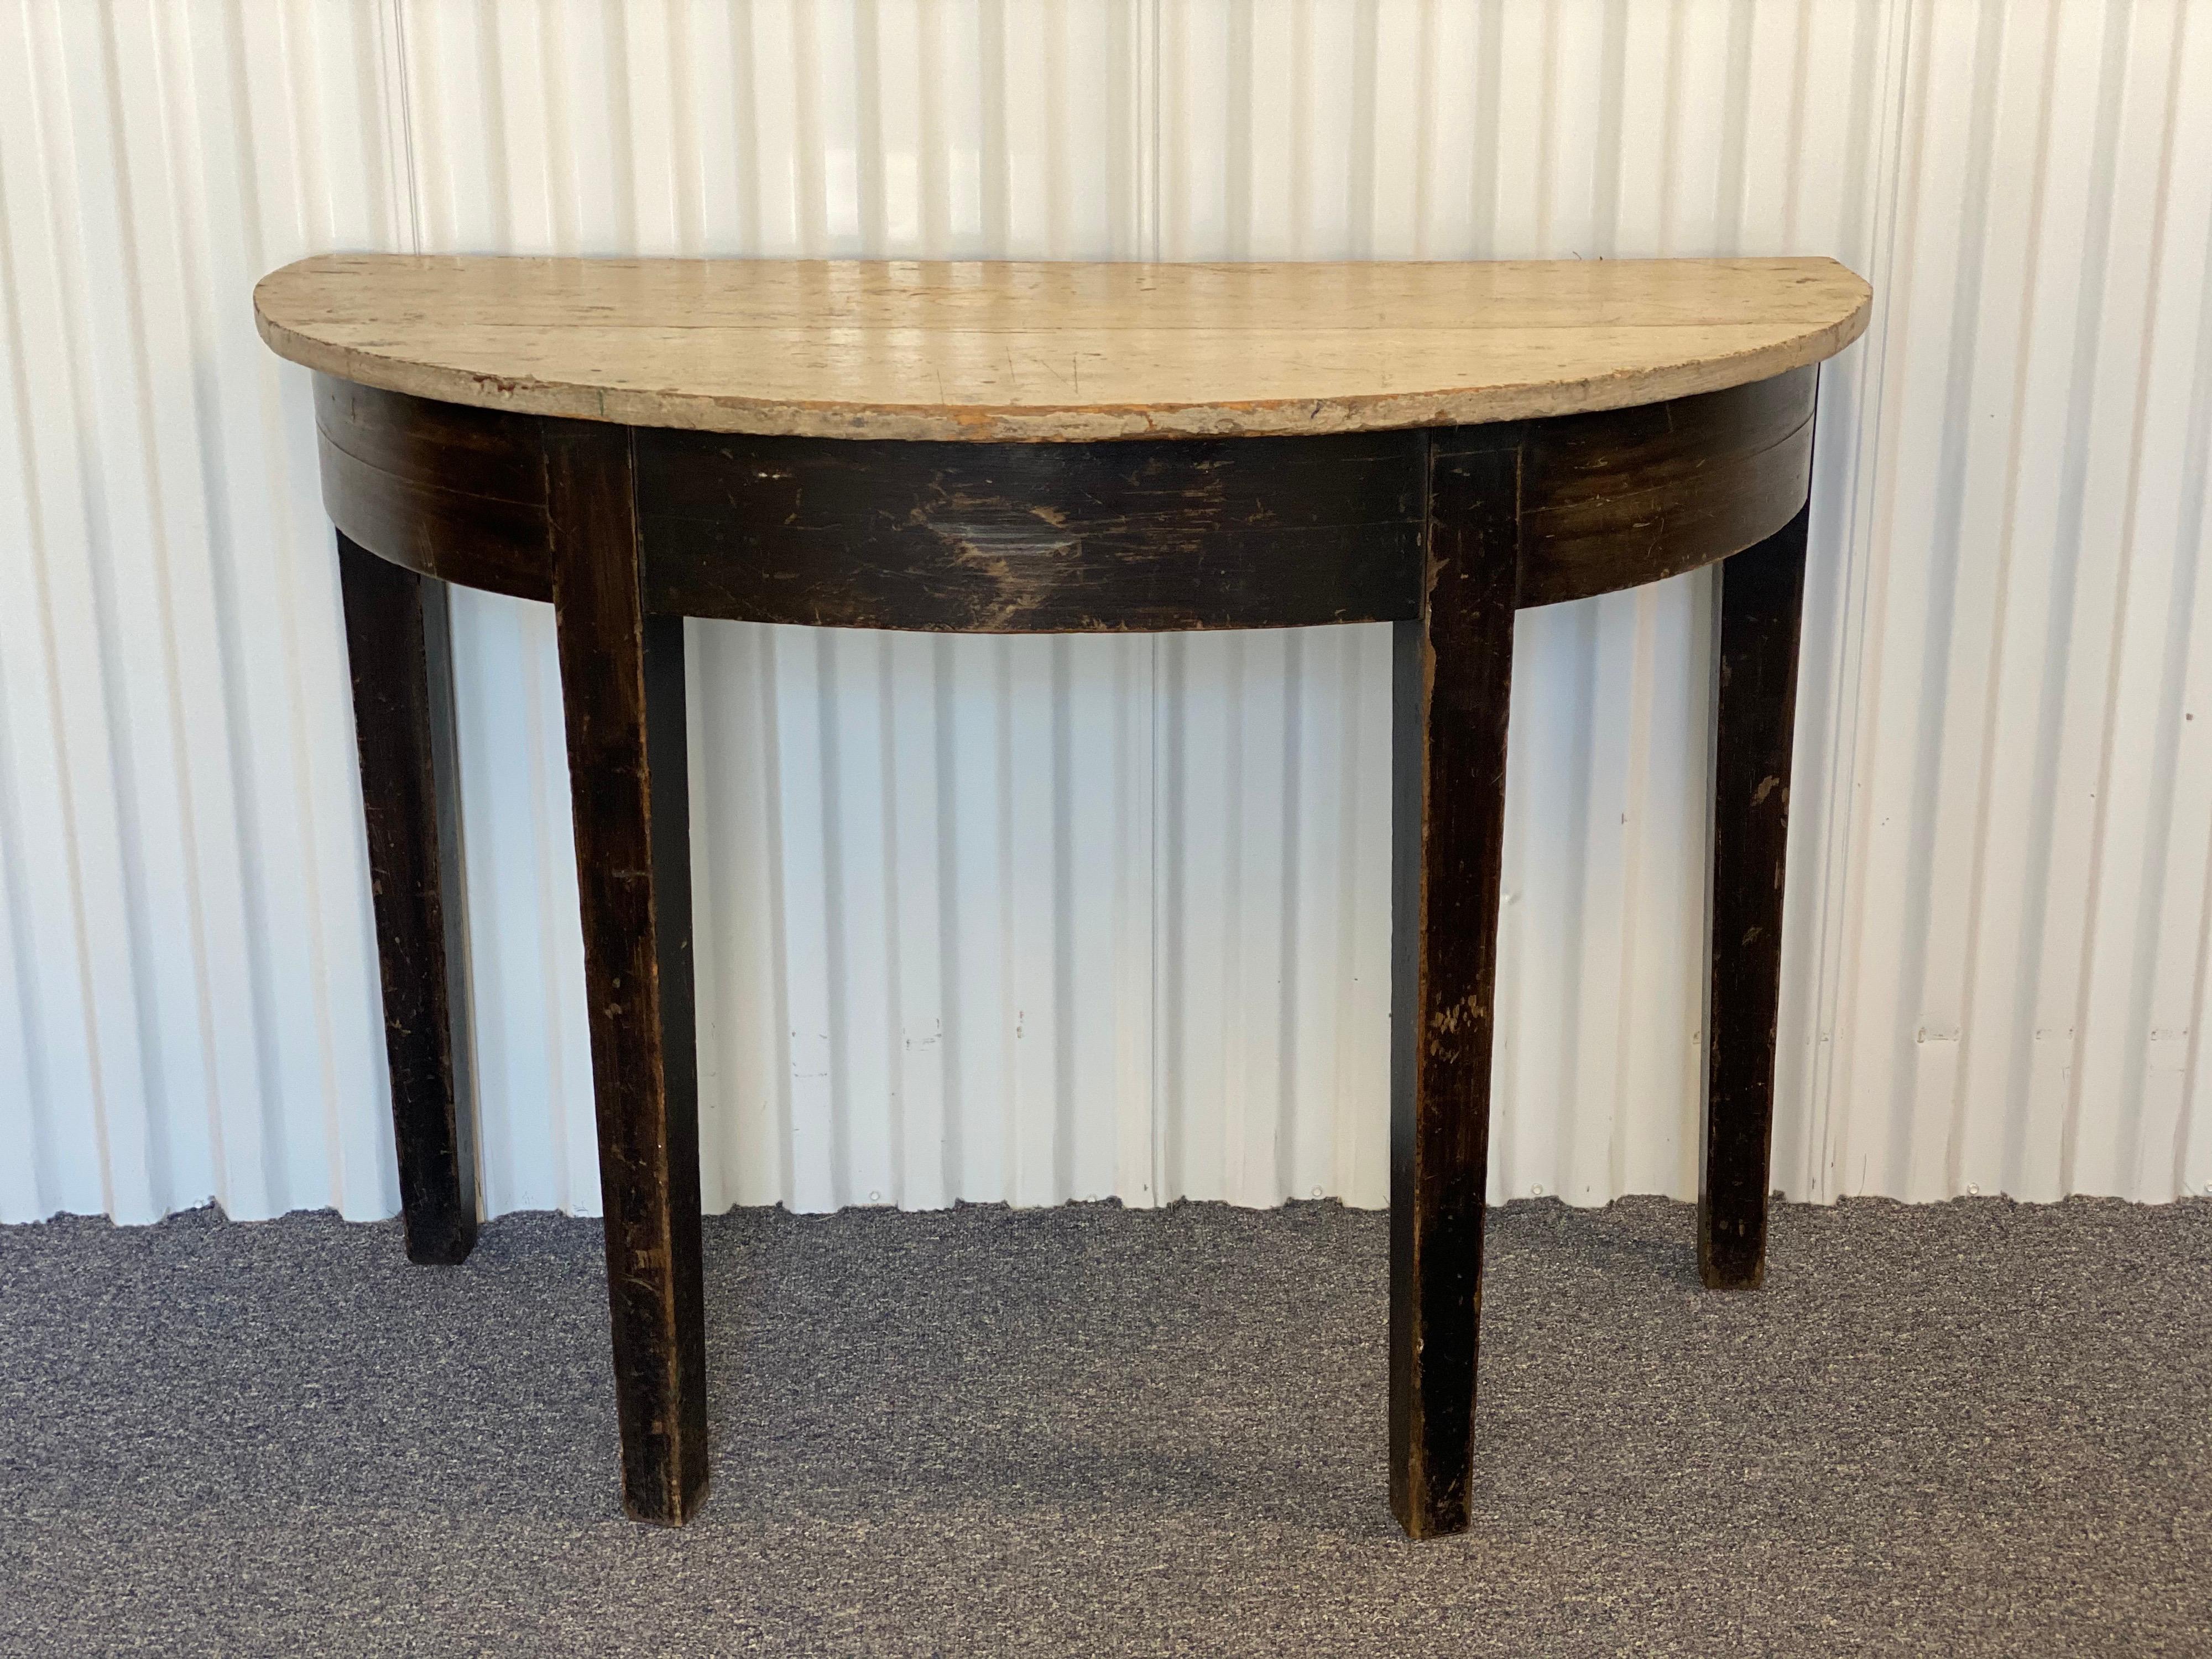 Rustic black painted demilune with creamy/grey top.
Nice worn patina, structurally sound.